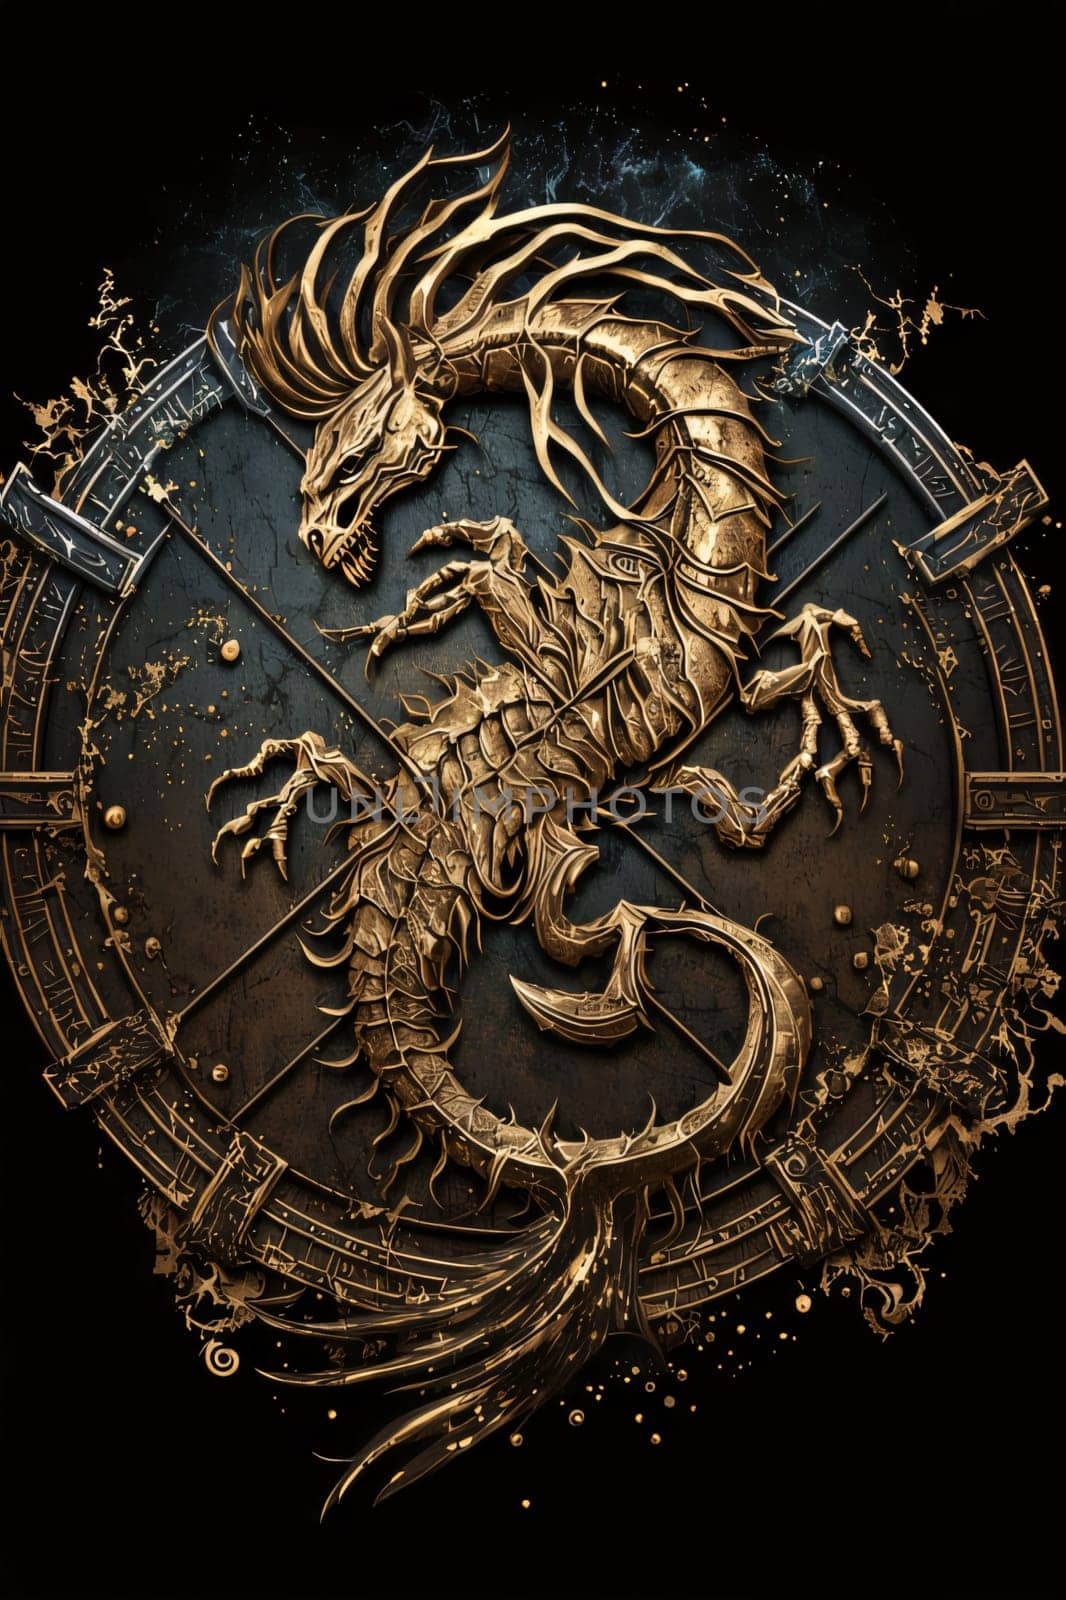 Signs of the zodiac: Zodiac sign of the dragon. Astrological symbol on a black background.